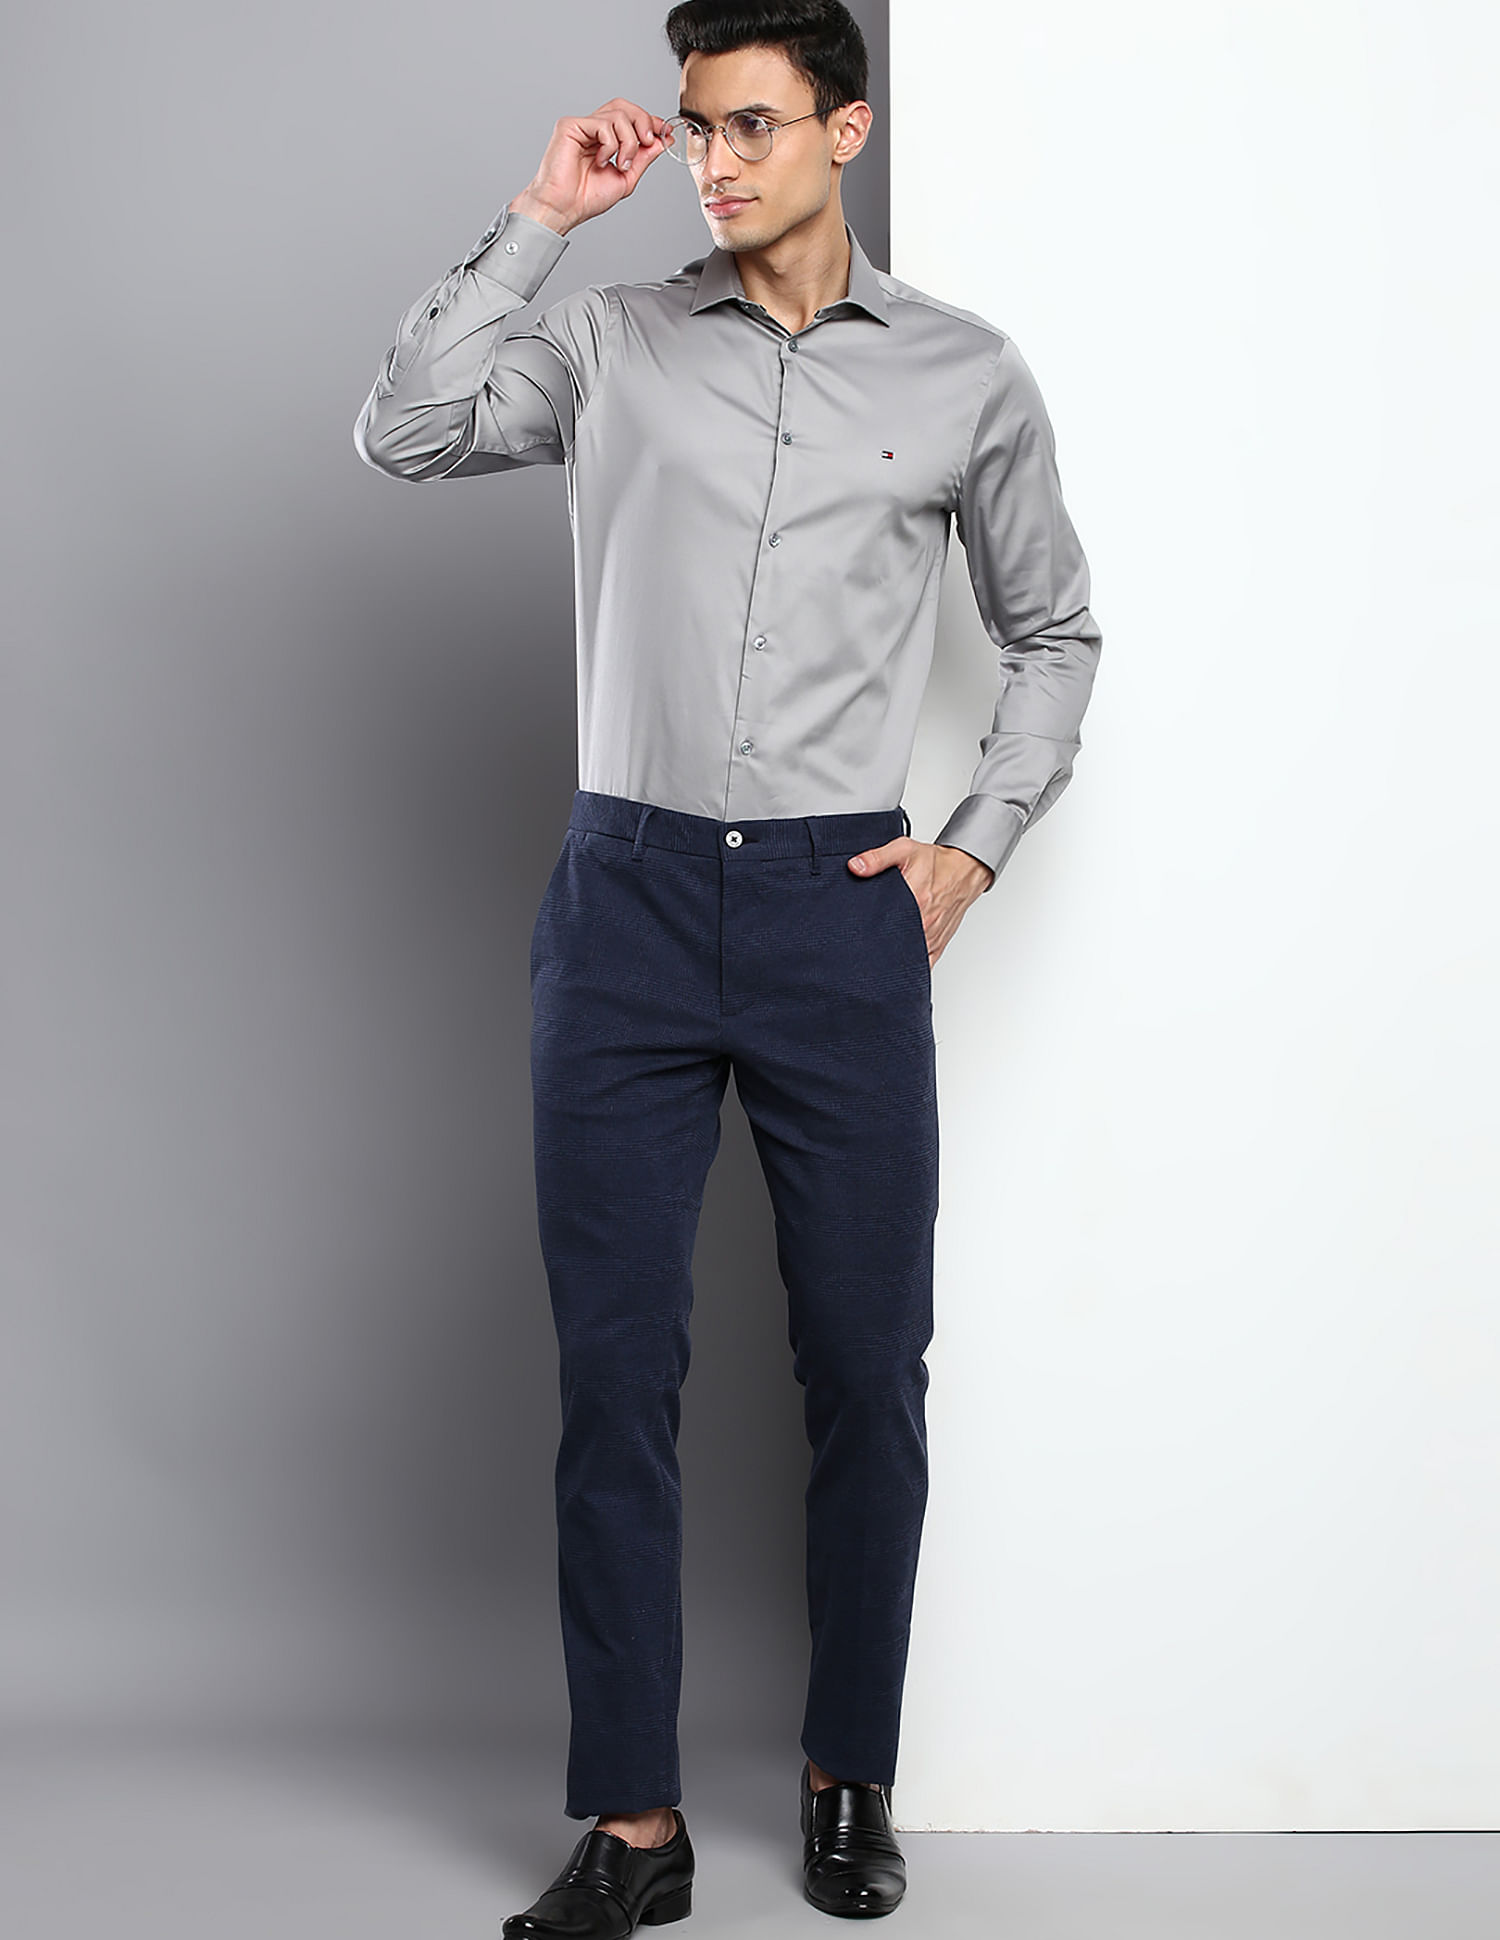 Buy Tommy Hilfiger Solid Satin Casual Shirt - NNNOW.com